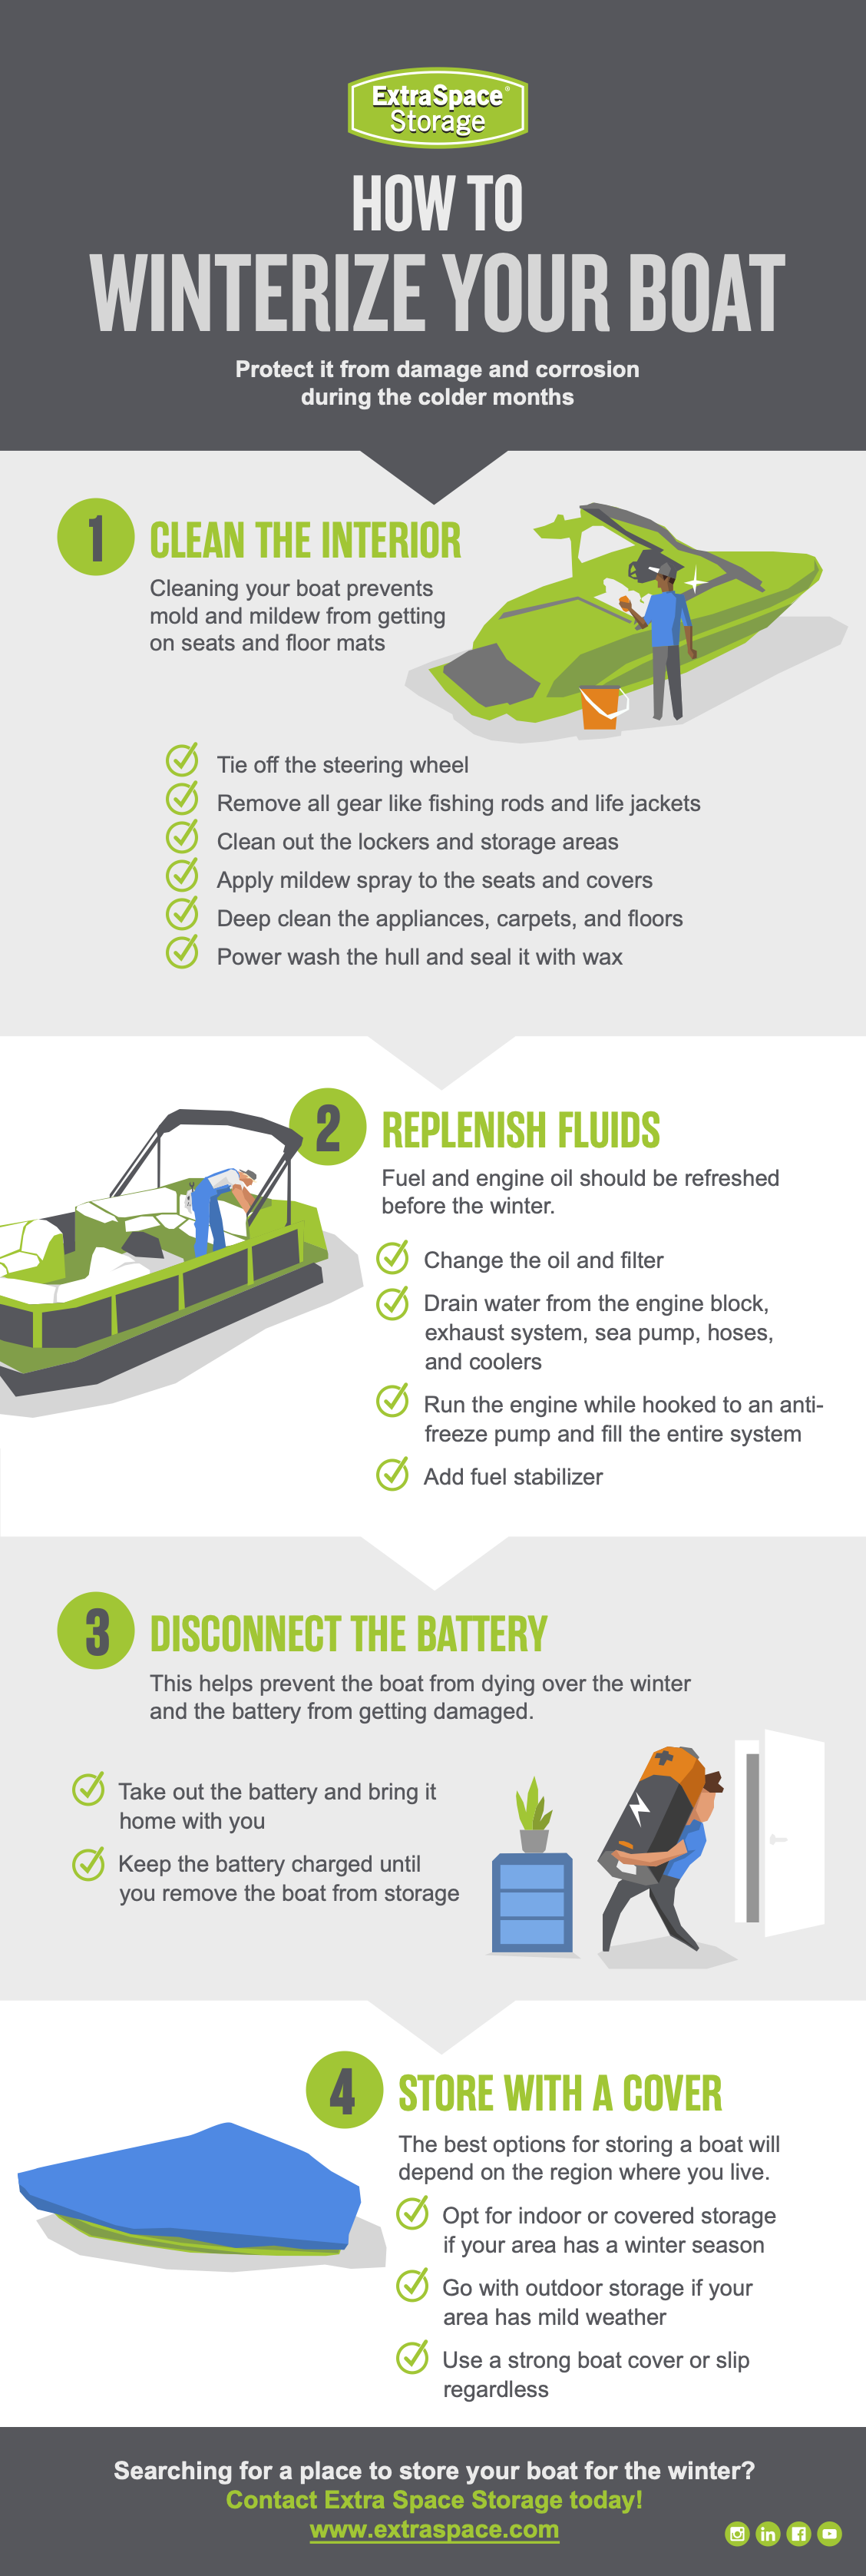 Infographic Describing the Ways to Winterize Your Boat Before Putting it in Storage